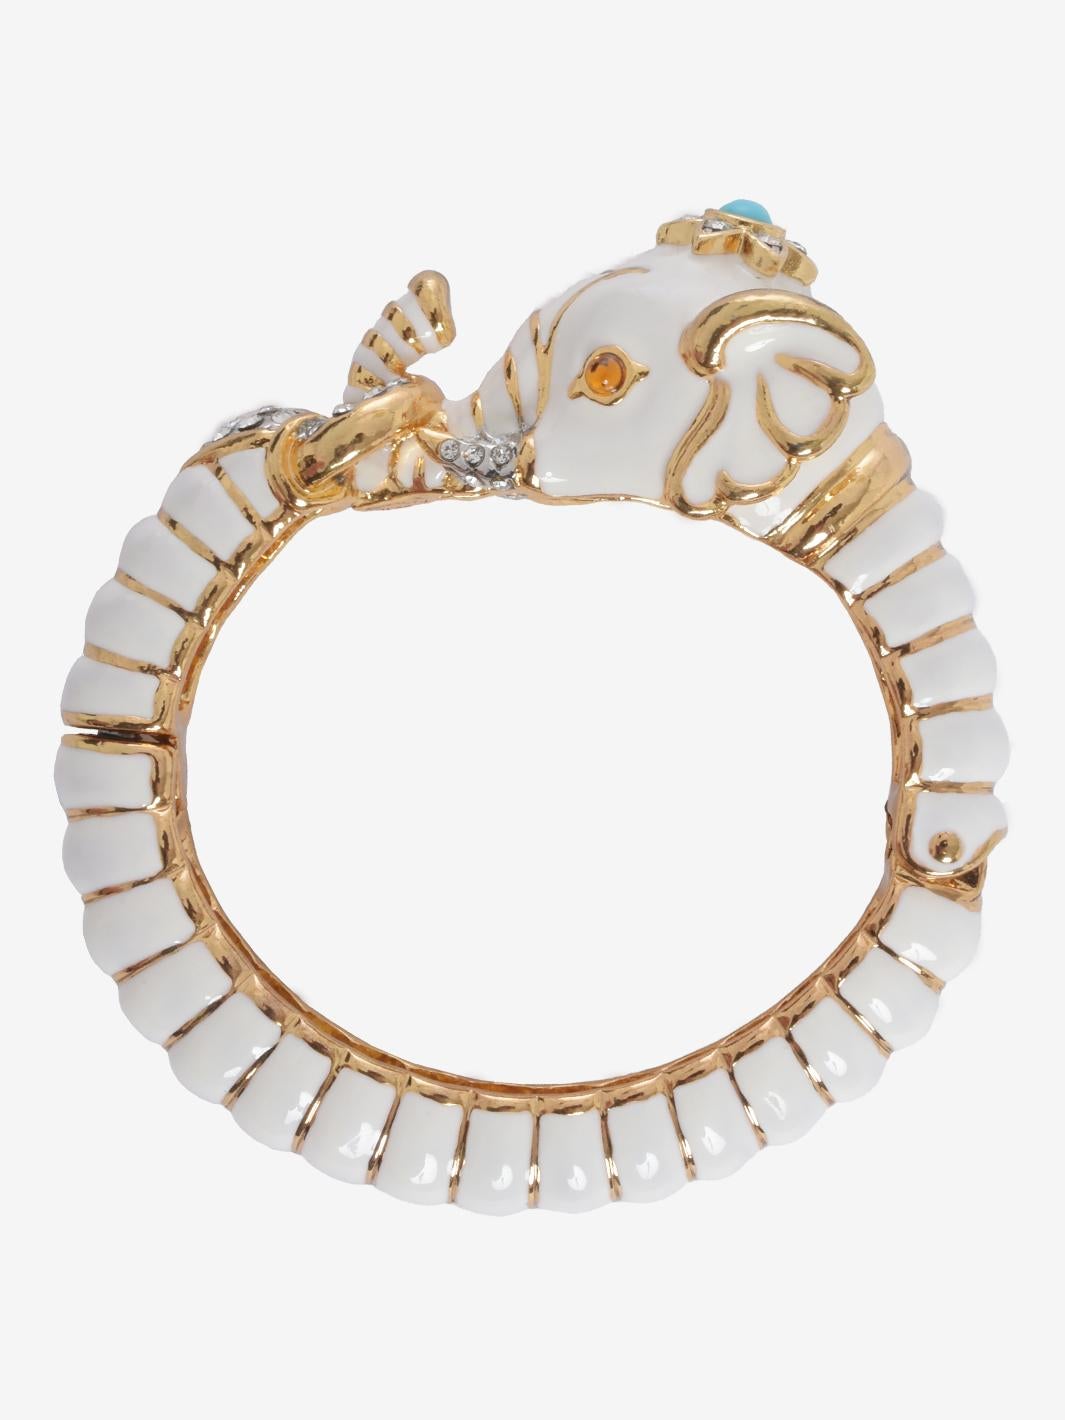 Kenneth Jay Lane Elephant Bracelet With Polychrome Rhinestones is a unique design made in the 1960s, a period when Lane, like the Beatles, traveled to India numerous times, inspiring him deeply. White enamel with polychrome rhinestones on American